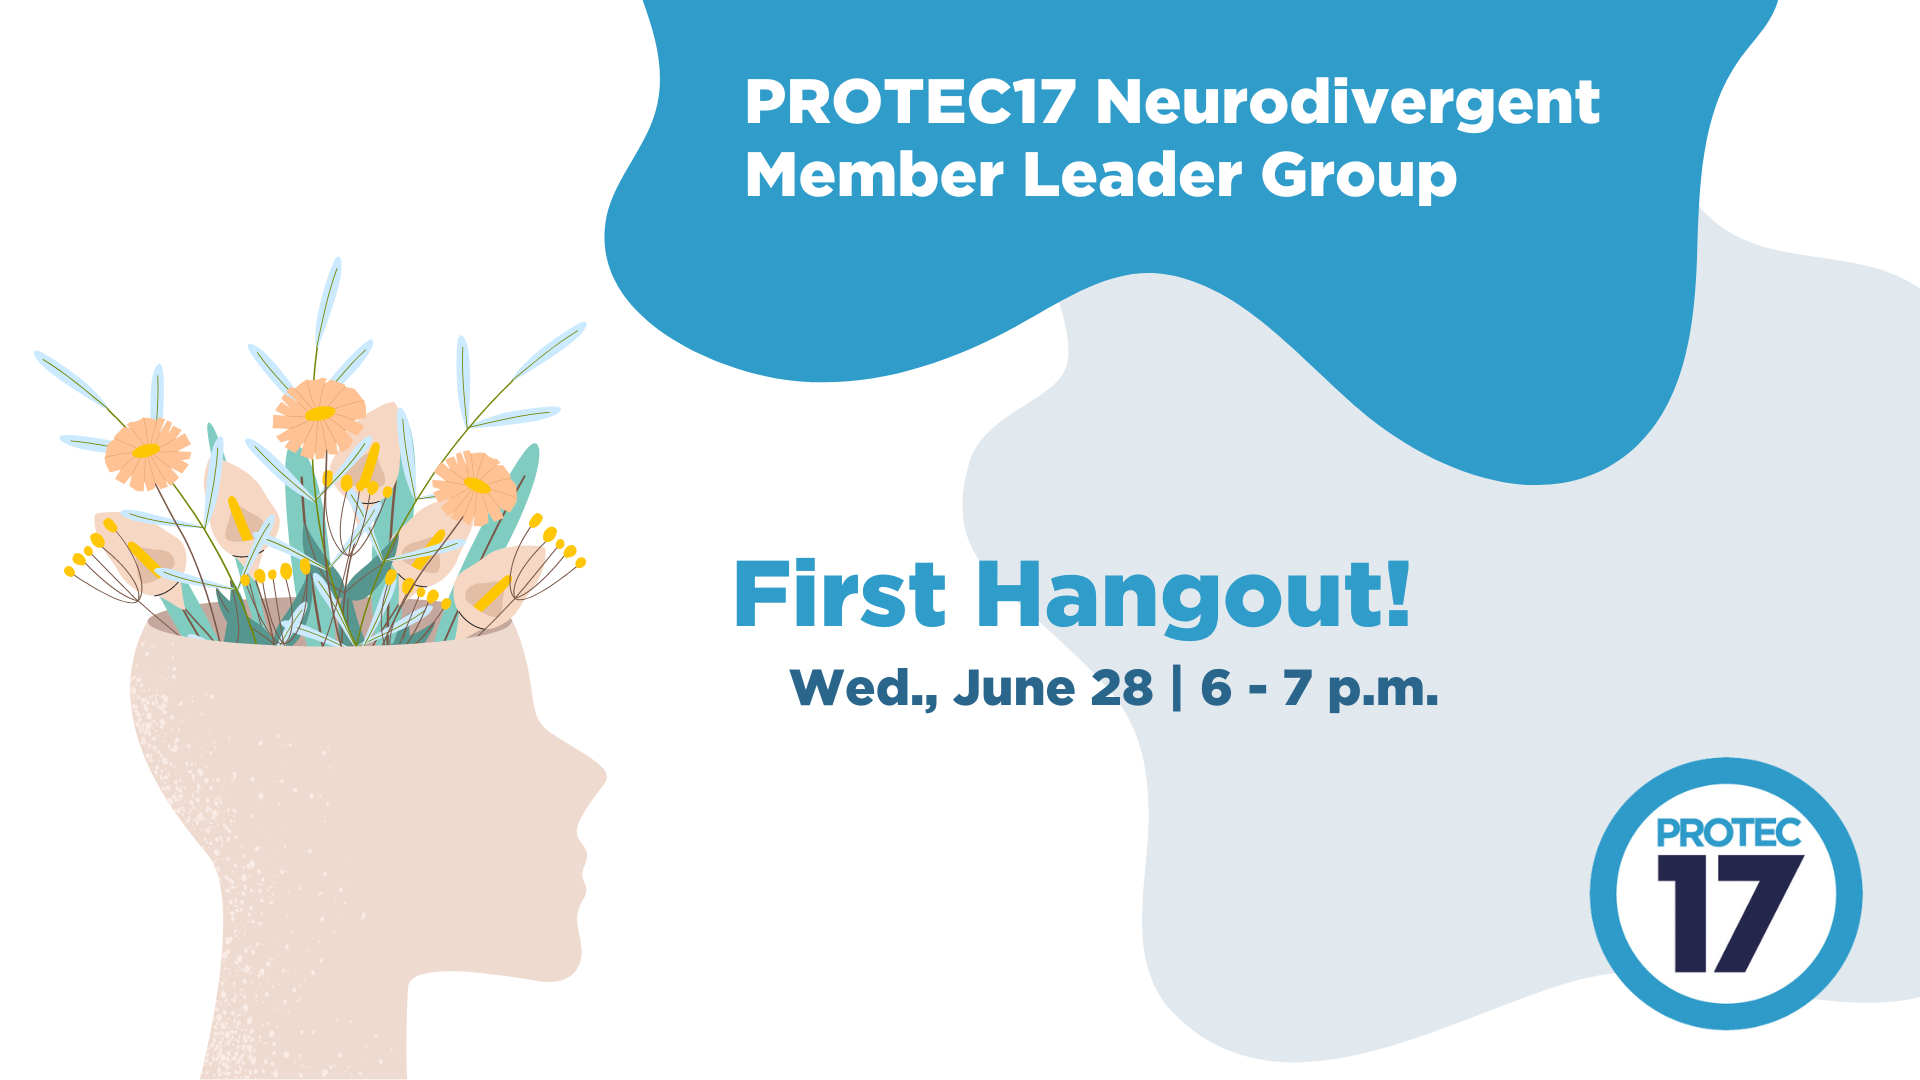 There is a colorful illustrated image of a head with flowers blooming from the top. There are abstract shapes in the background and the text reads, "PROTEC17 Neurodivergent Member Leader Group | First Hangout! Wed., June 28 | 6 - 7 p.m." The PROTEC17 logo is in the bottom right.